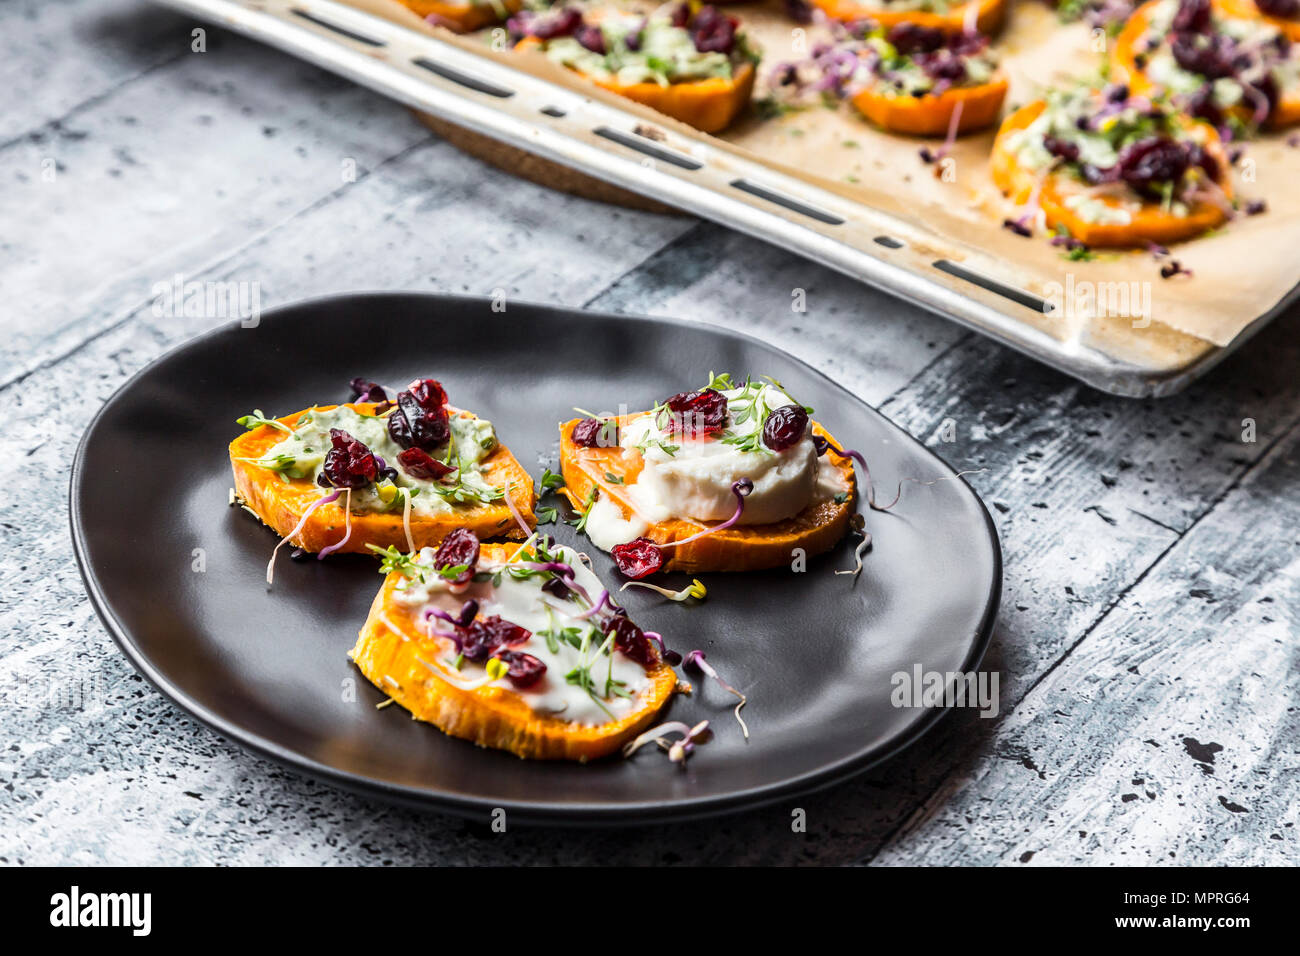 Slices of sweet potato with cream cheese, ramson cream, goat cheese, cress and cranberries Stock Photo